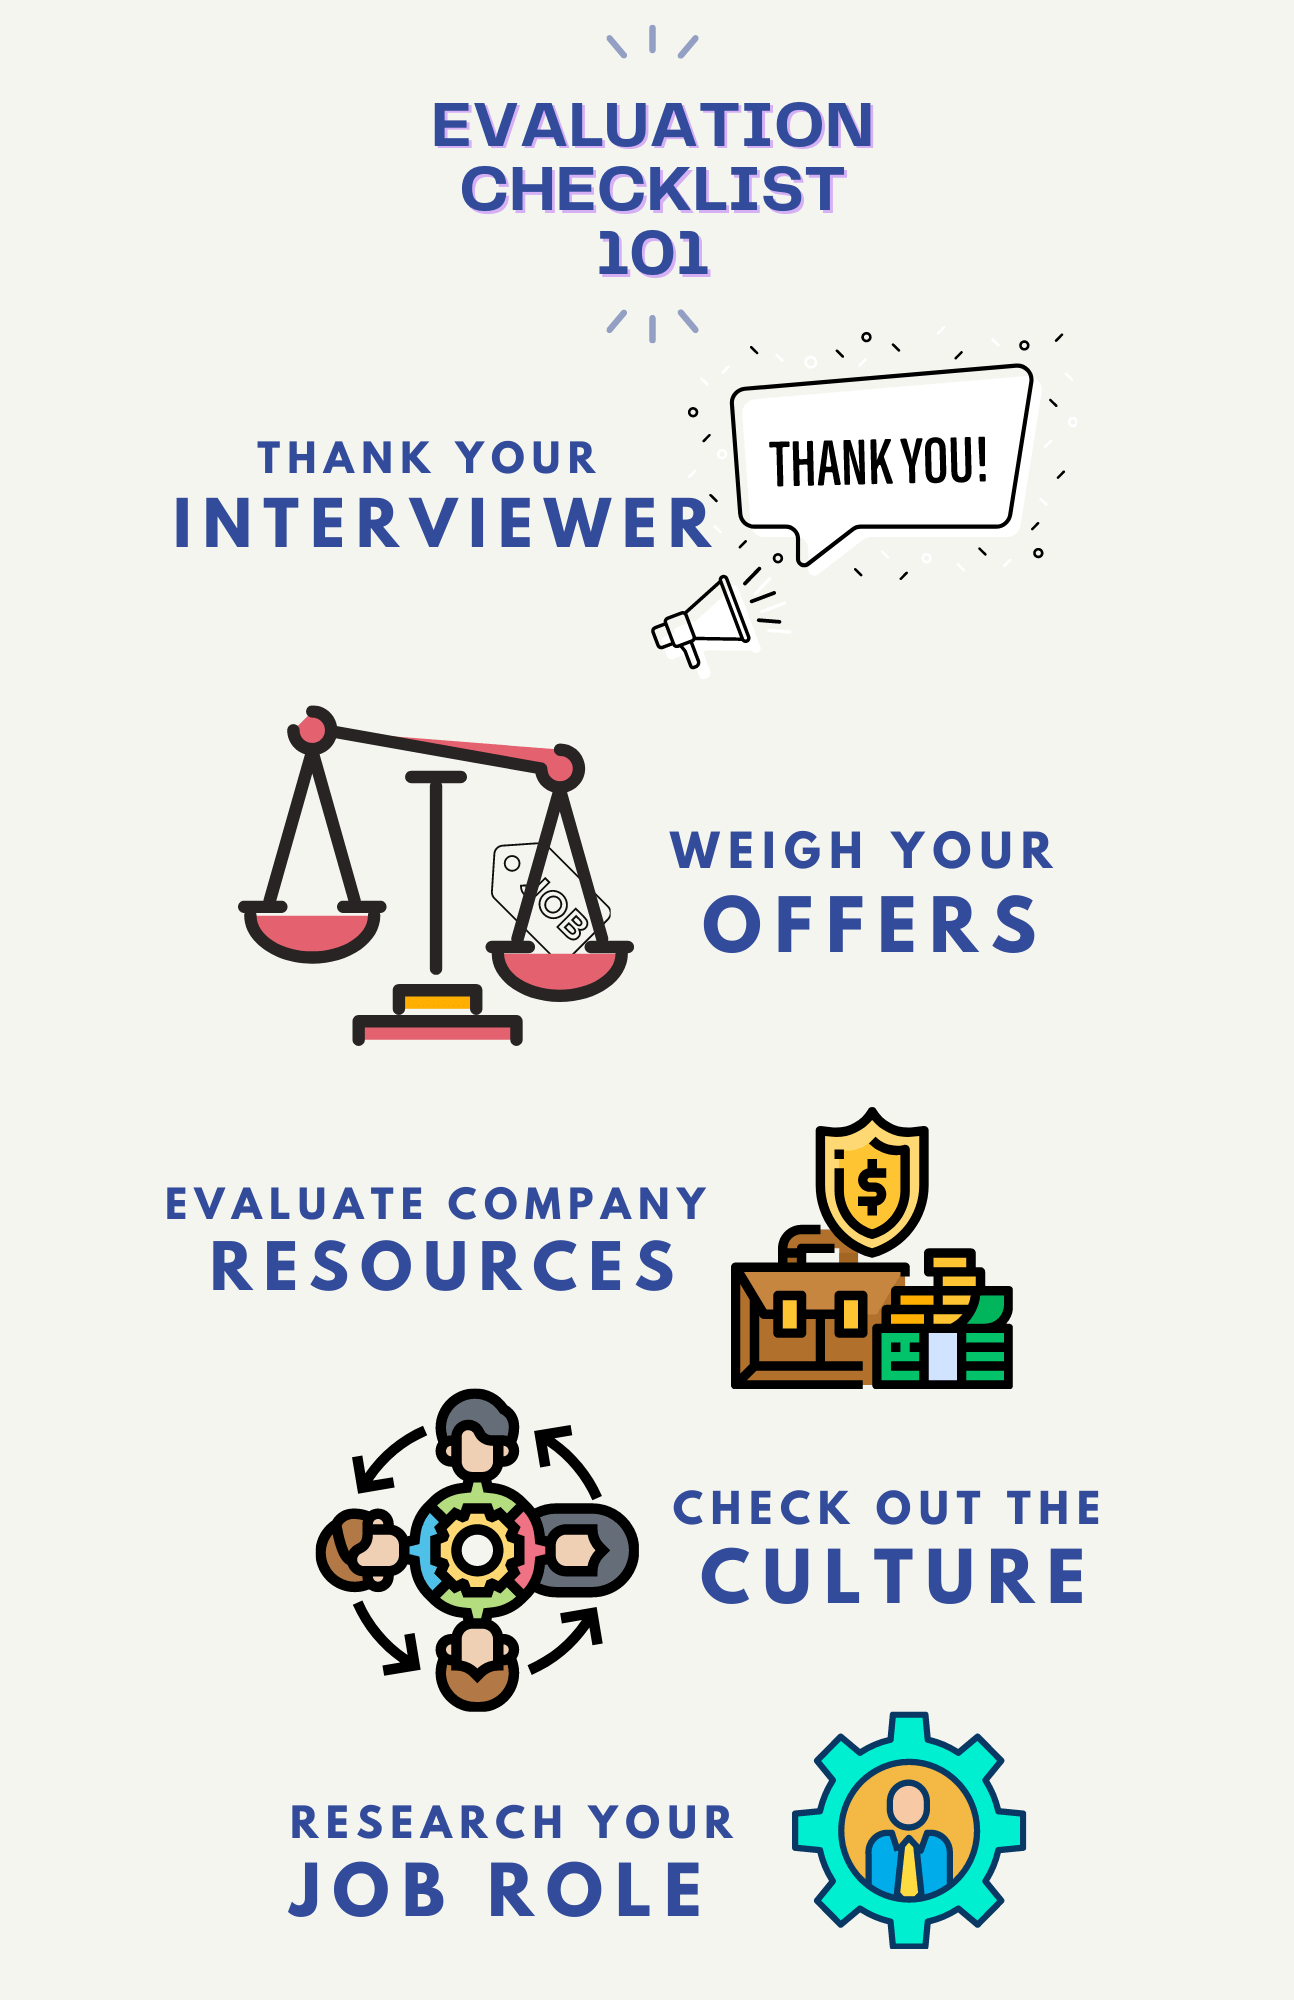 Evaluating the job offer infographic